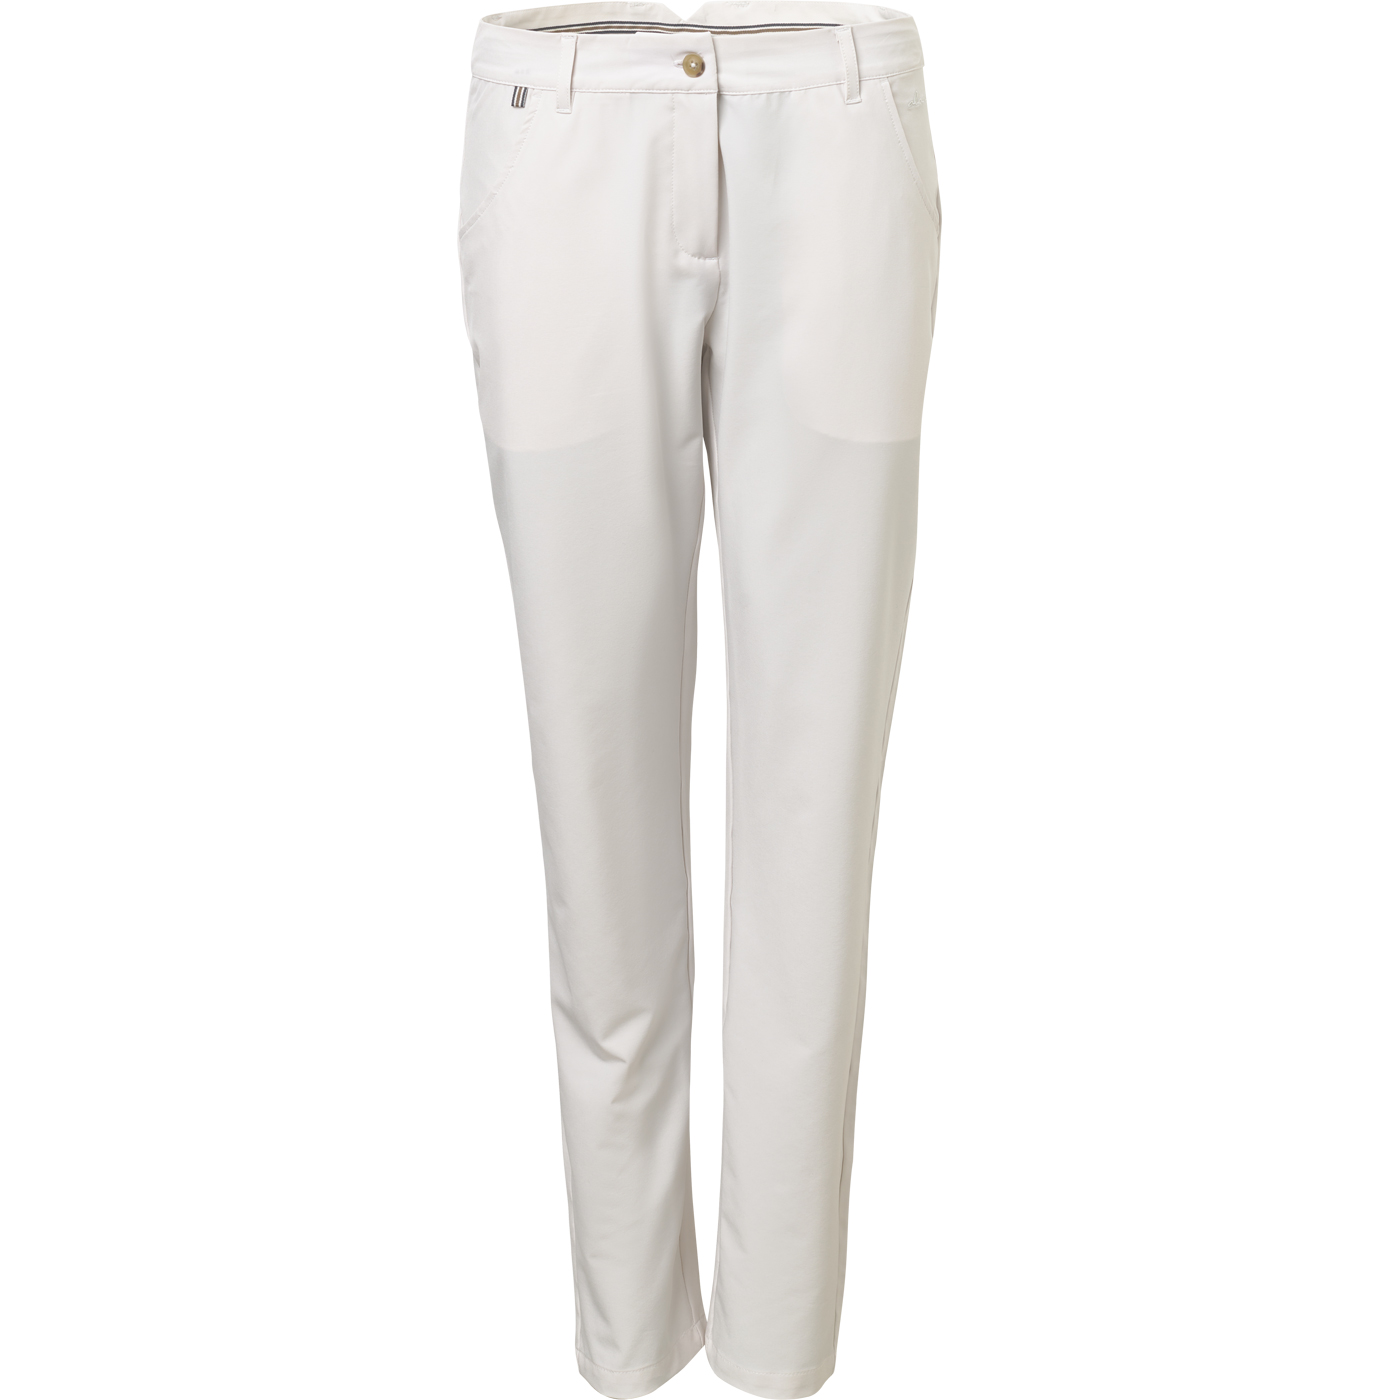 Lds Kildare trousers - clam in the group WOMEN / All clothing at Abacus Sportswear (2980188)